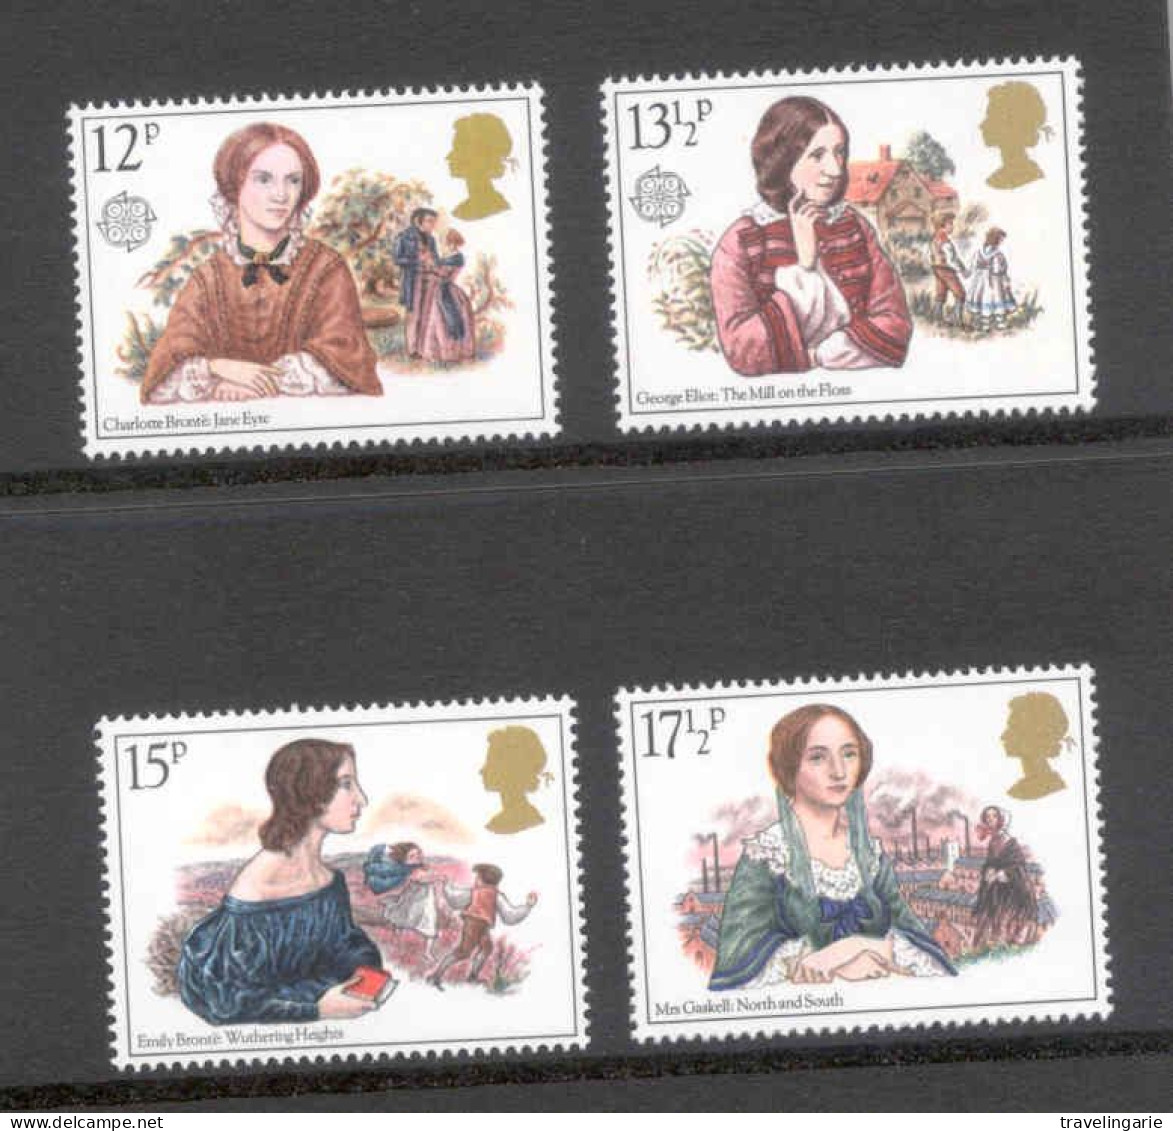 Great Britain 1980 Europa-CEPT Famous Athouresses MNH ** - Unused Stamps